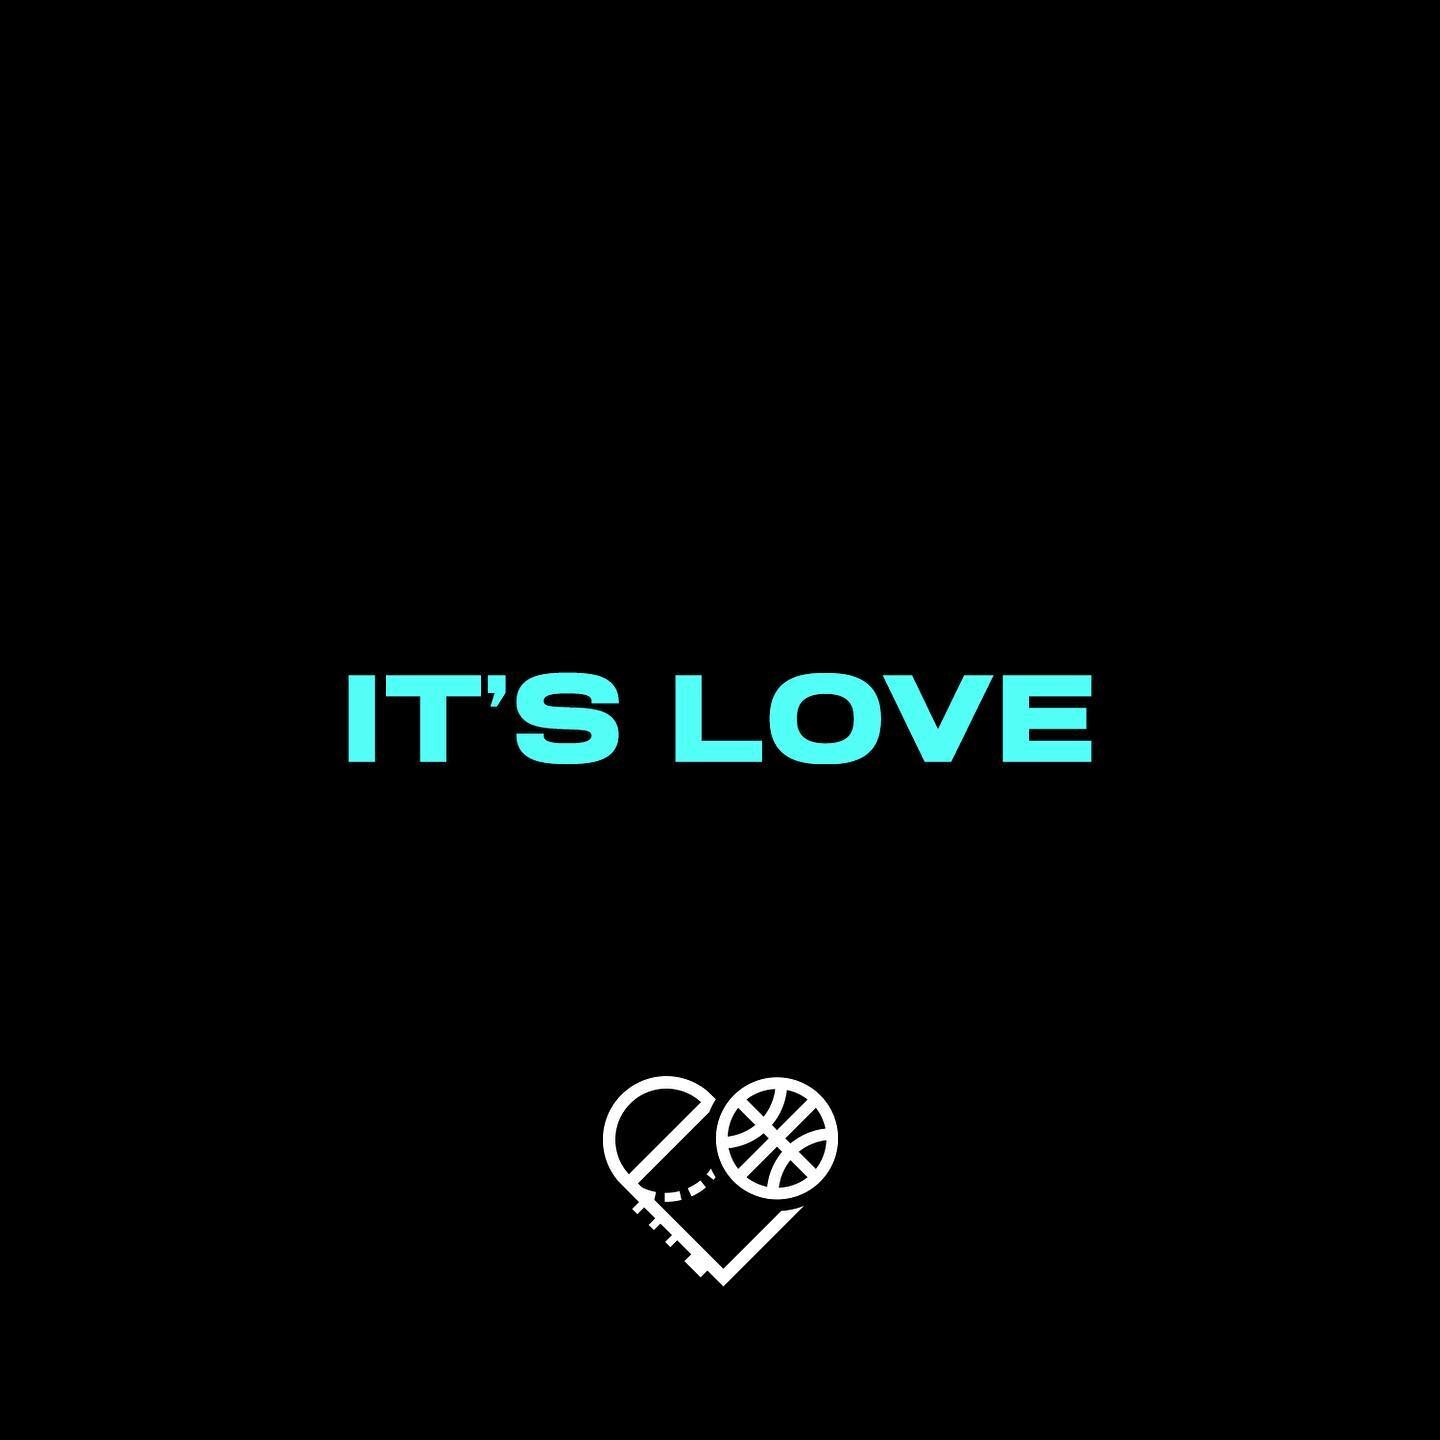 Nothing but love for everyone who&rsquo;s been supportive and patient while HoopLove has been preparing to launch. Site coming soon! 🏀🧡

#itslove #hooplove #basketball #fortheloveofhoops #ilovethisgame🏀 #spreadthelove